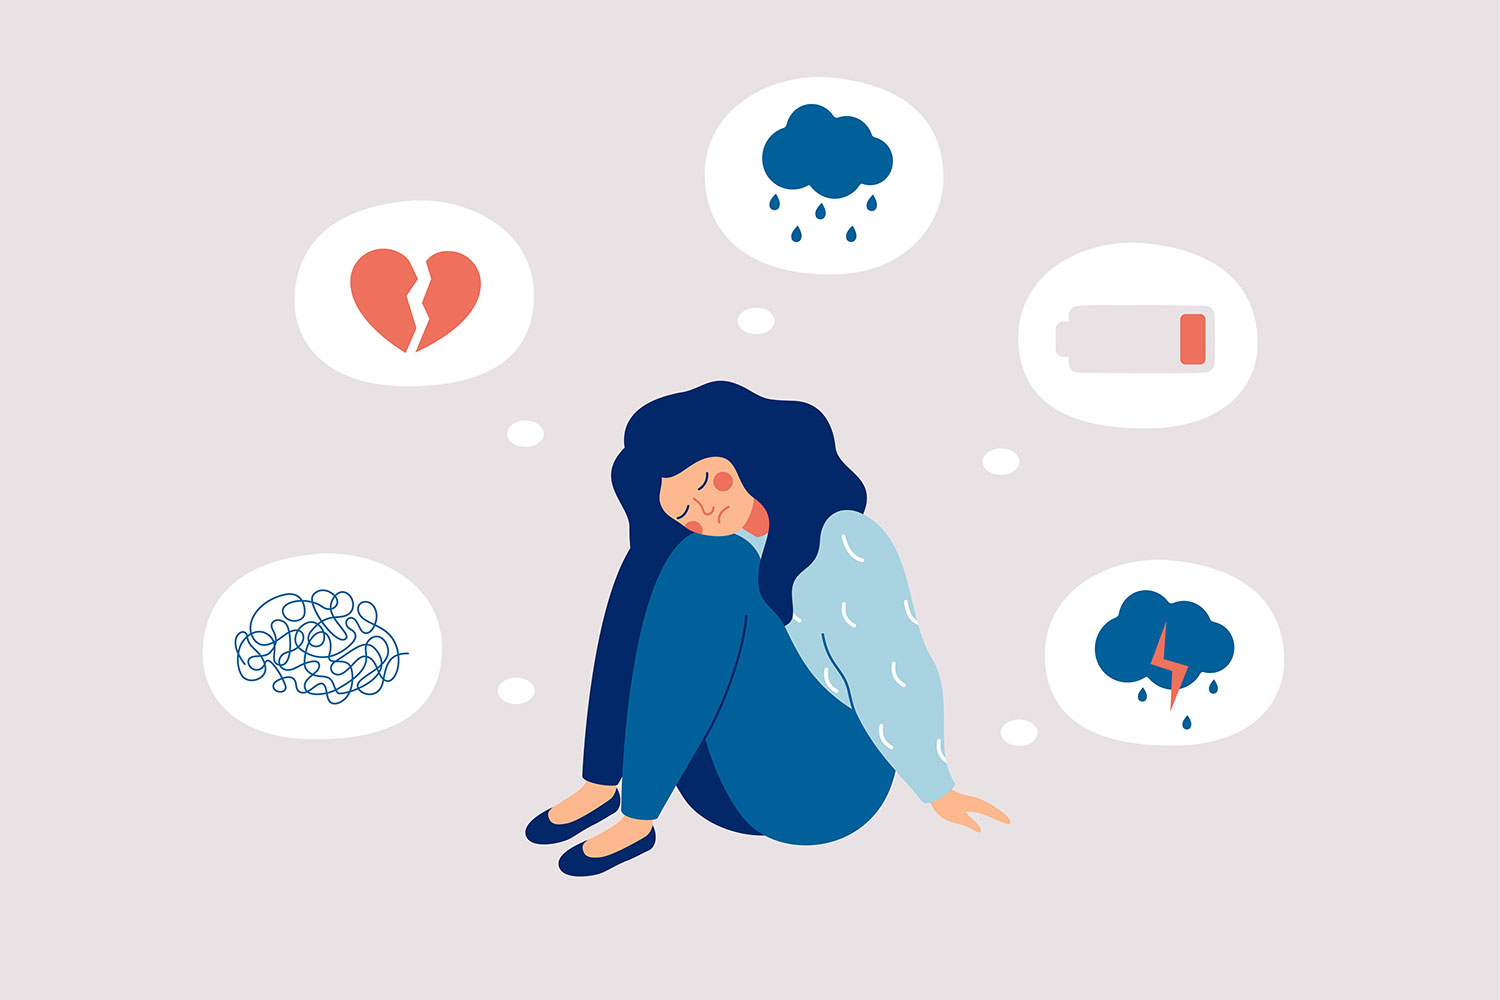 Working Through Grief: How to Build a Supportive Workplace